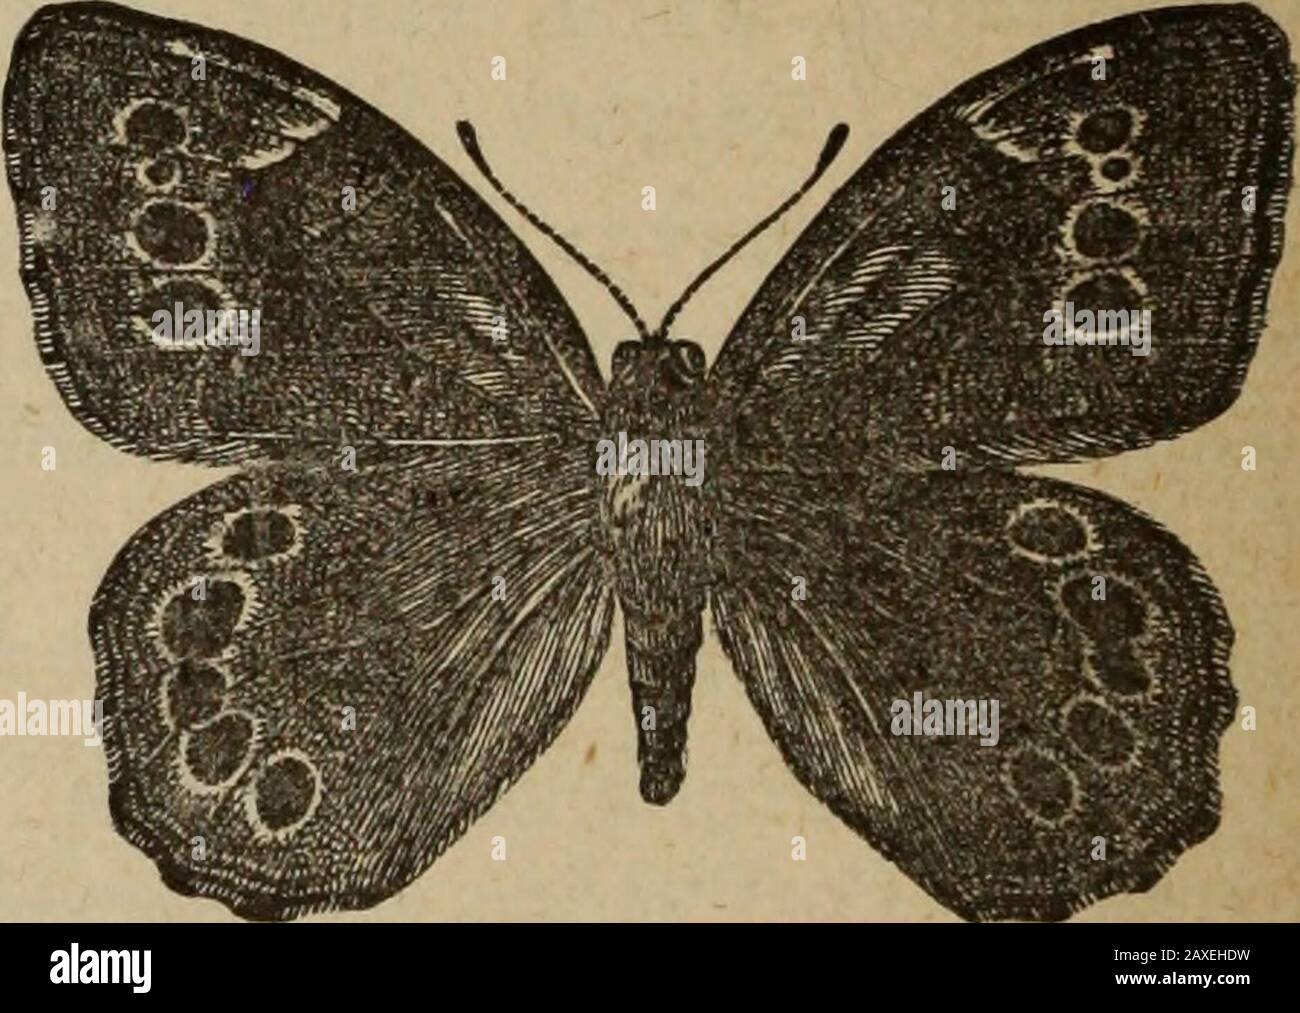 Annual report of the Fruit Growers' Association of Ontario, 1896 .   , Fig. 98. Fig. 97. 37. Neonympha Canthus, Boisd.-Lec.—Sudbury ; Orillia, common in low meadowsin July (C. E. Grant); Truro, N. S.; and Lower Stewiacke, N. S. (H. Piers). 38. Neonympha Eurytris, i^a6r.—Orillia, common in open woods in June (0. E.Grant). 42. Satyrus Alope, i^aftr.—Niagara Falls, Ont., July 14, 1896 (A. Gibson); Truro,N. S., rare (Miss Eaton). 45 Libythea Bachmani, Kirtl.—Taken in Toronto in 1895, and June 7, 1896, byMr. McDonagh. Fig. 90. 46 Thecla Acadica, Edw.—Orillia, usually rare, but very abundant in July Stock Photo